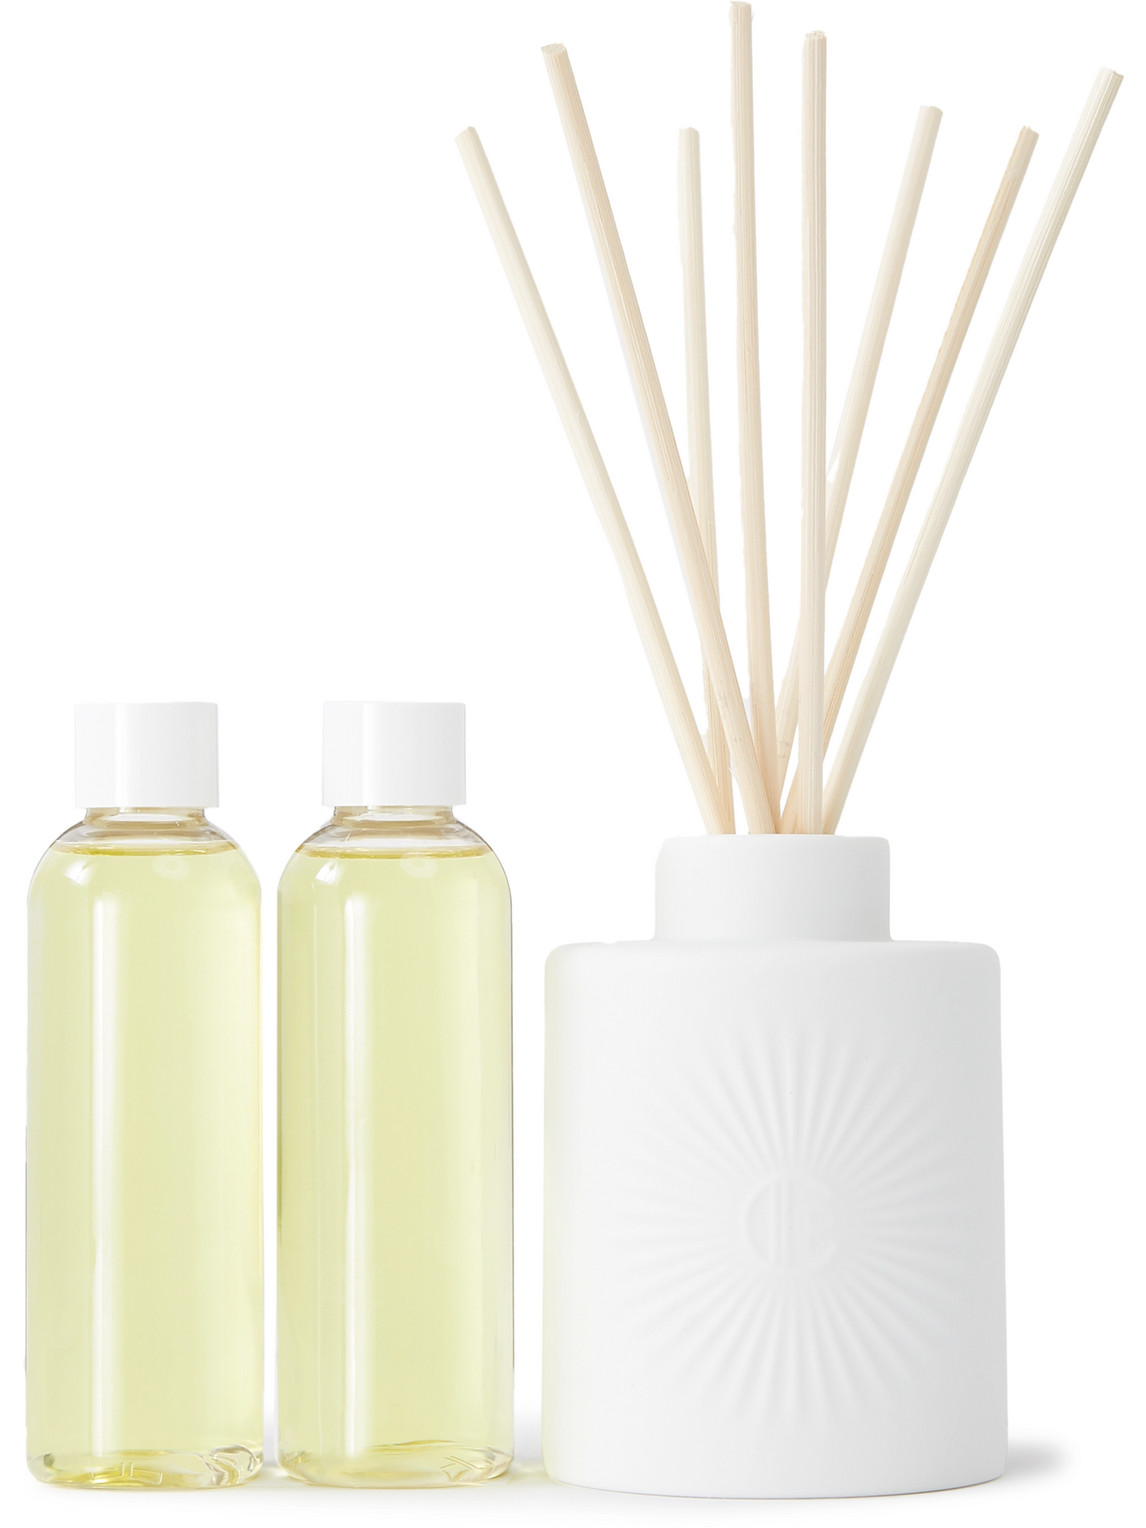 Claus Porto Voga Reed Diffuser In Colorless